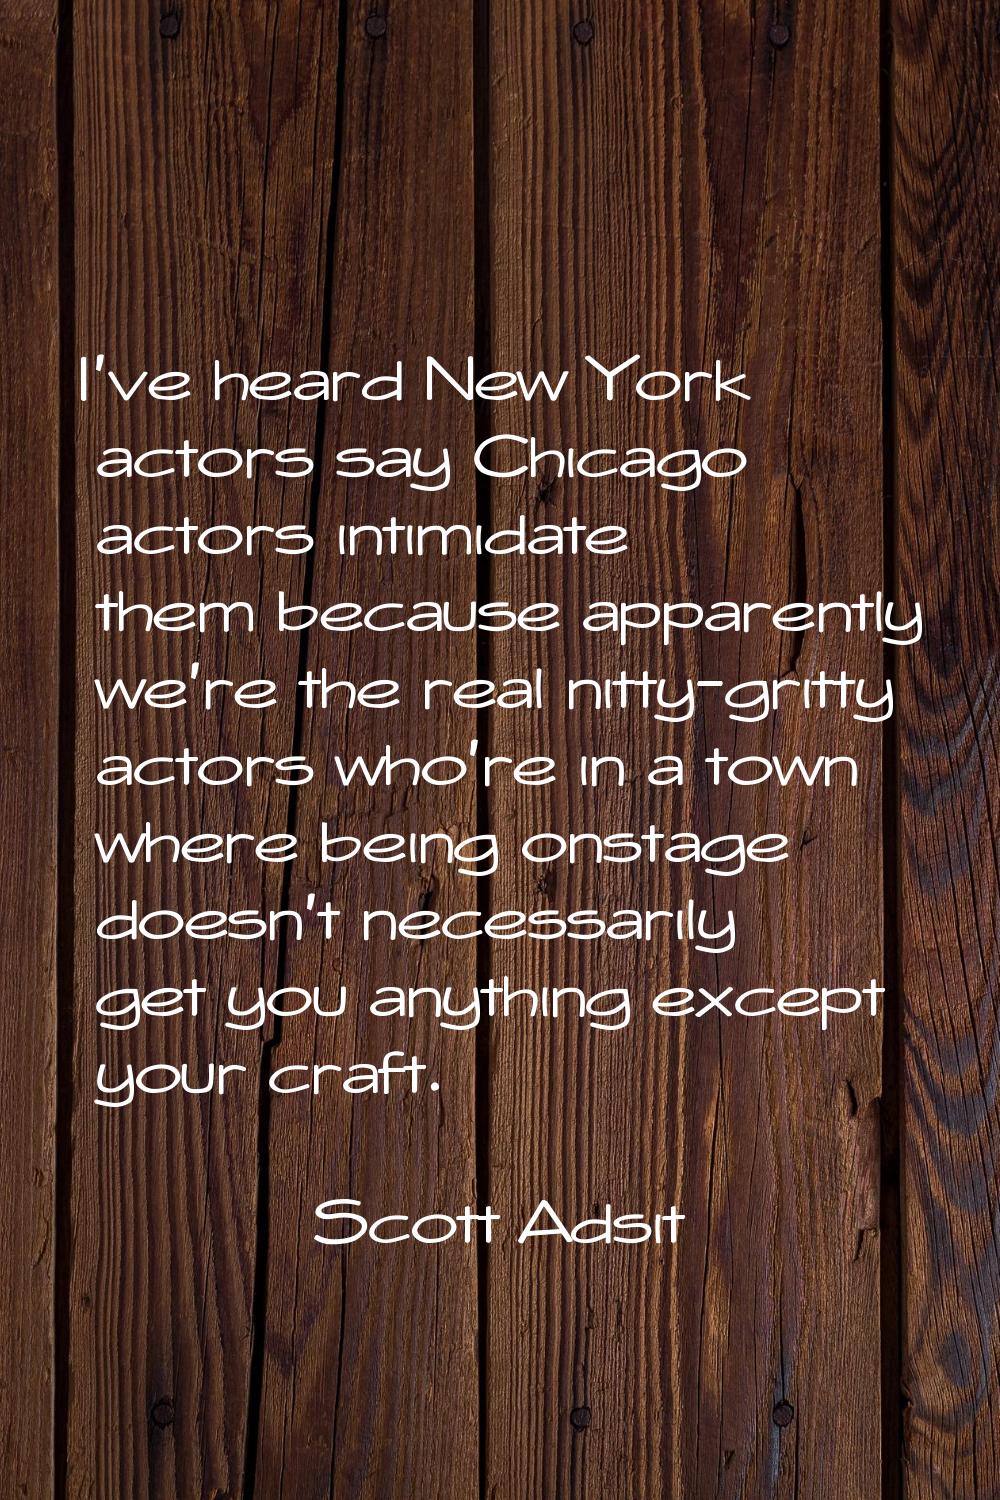 I've heard New York actors say Chicago actors intimidate them because apparently we're the real nit